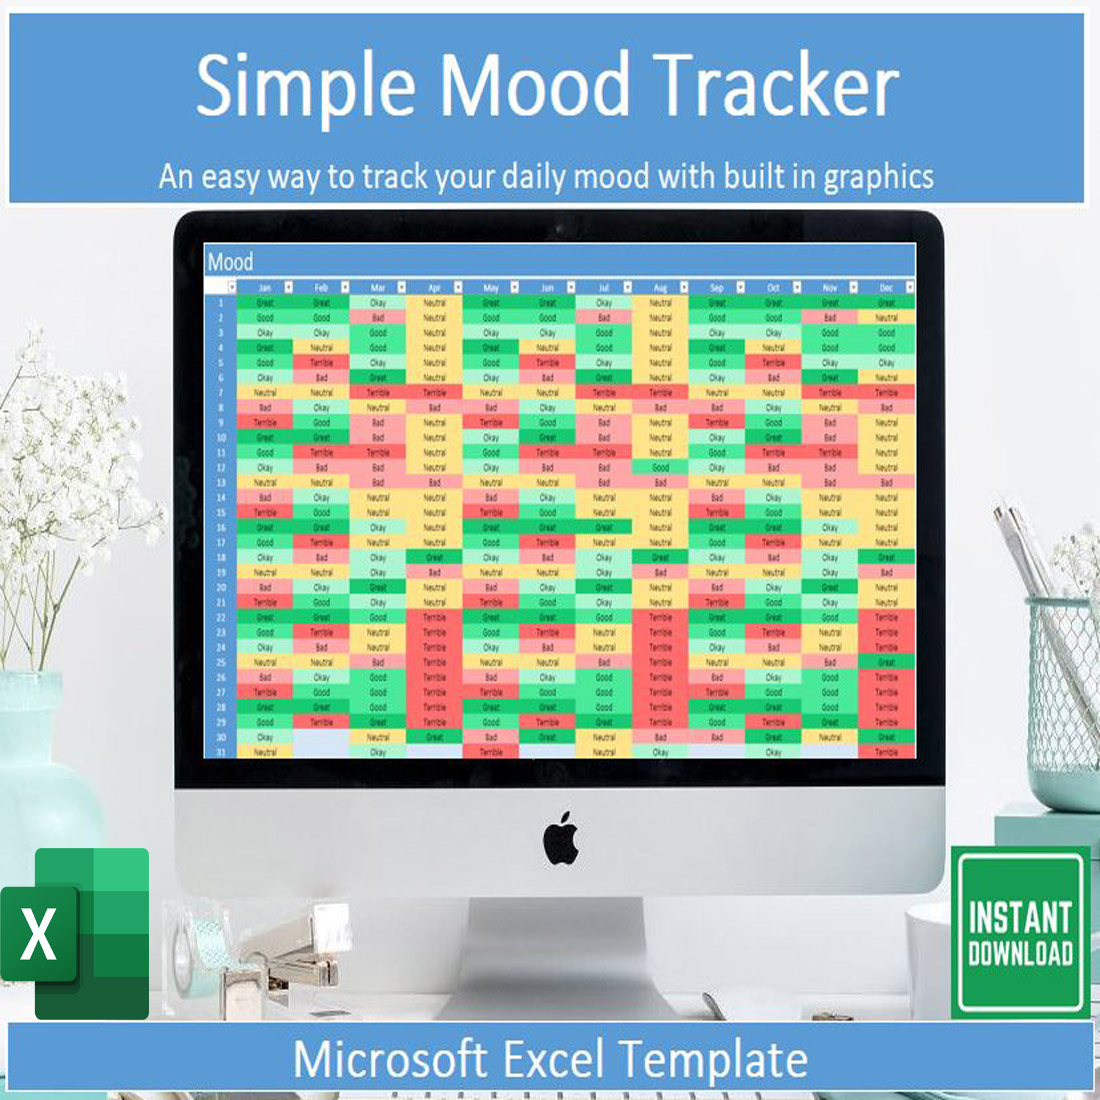 Simple Mood Tracker Template Tool for Microsoft Excel cover image.